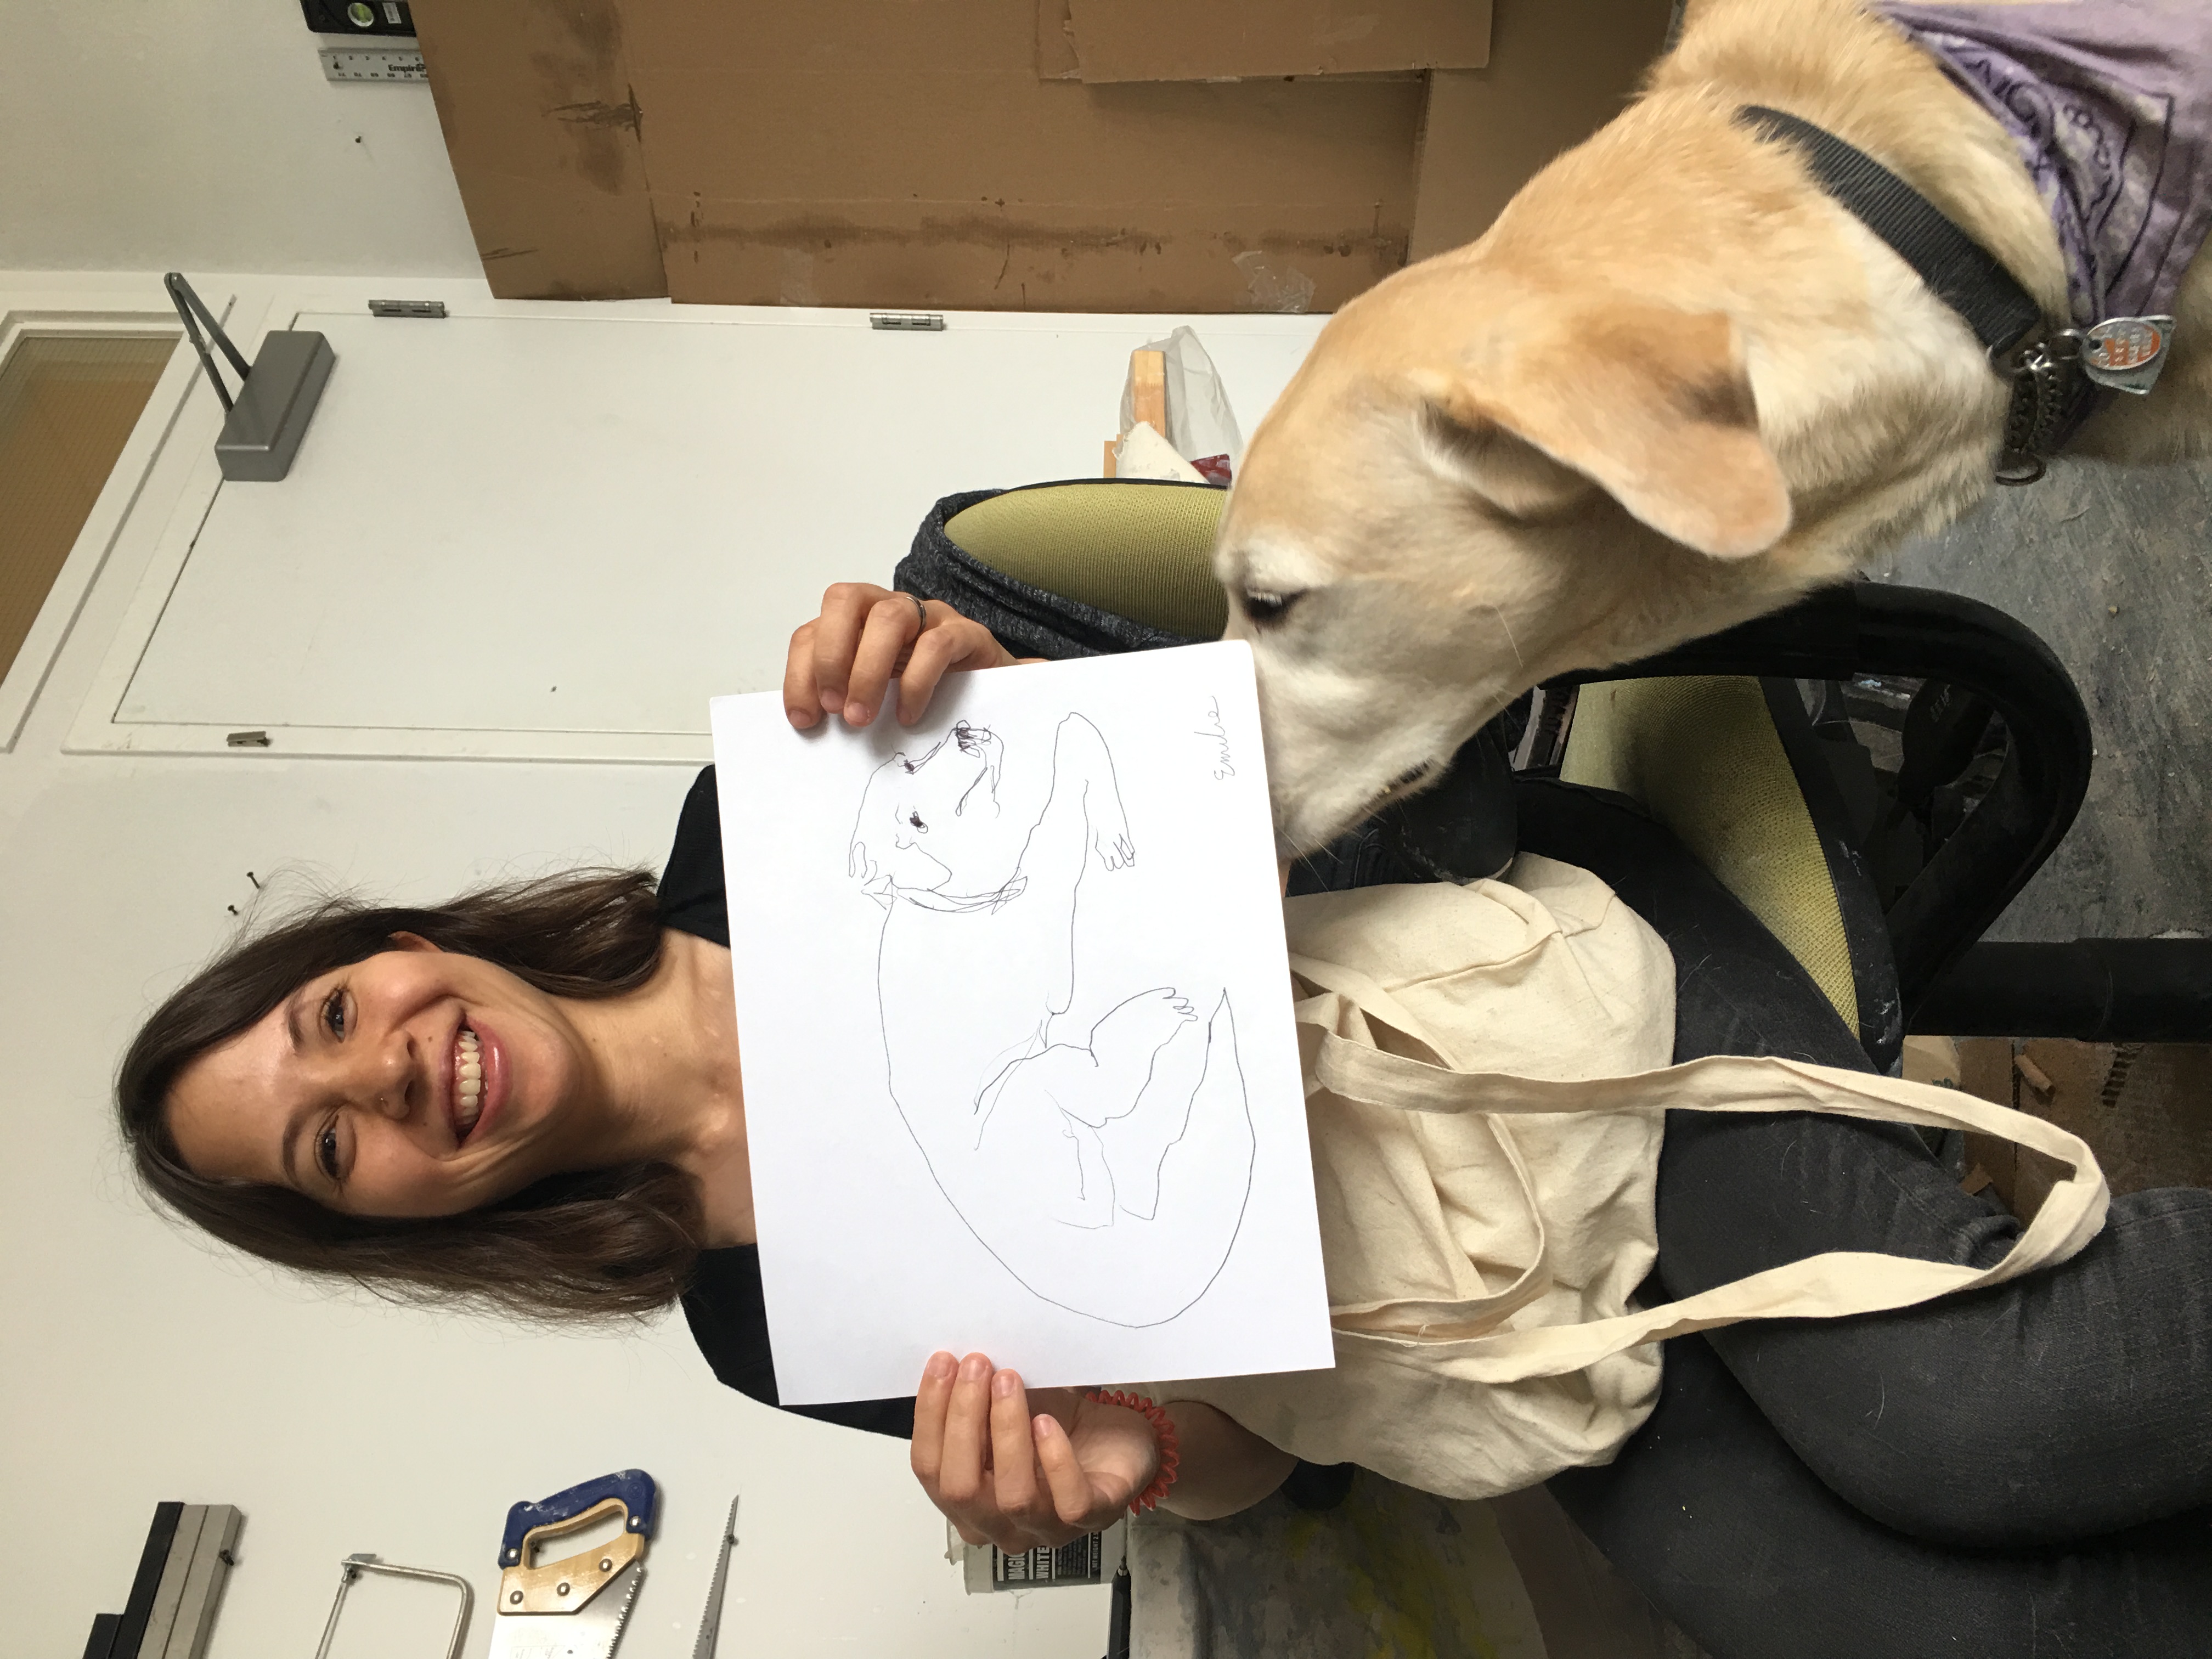 A smiling person with a bob style haircut, holding a drawing of a dog. The dog that appears to be in the drawing is also present in the photo. 